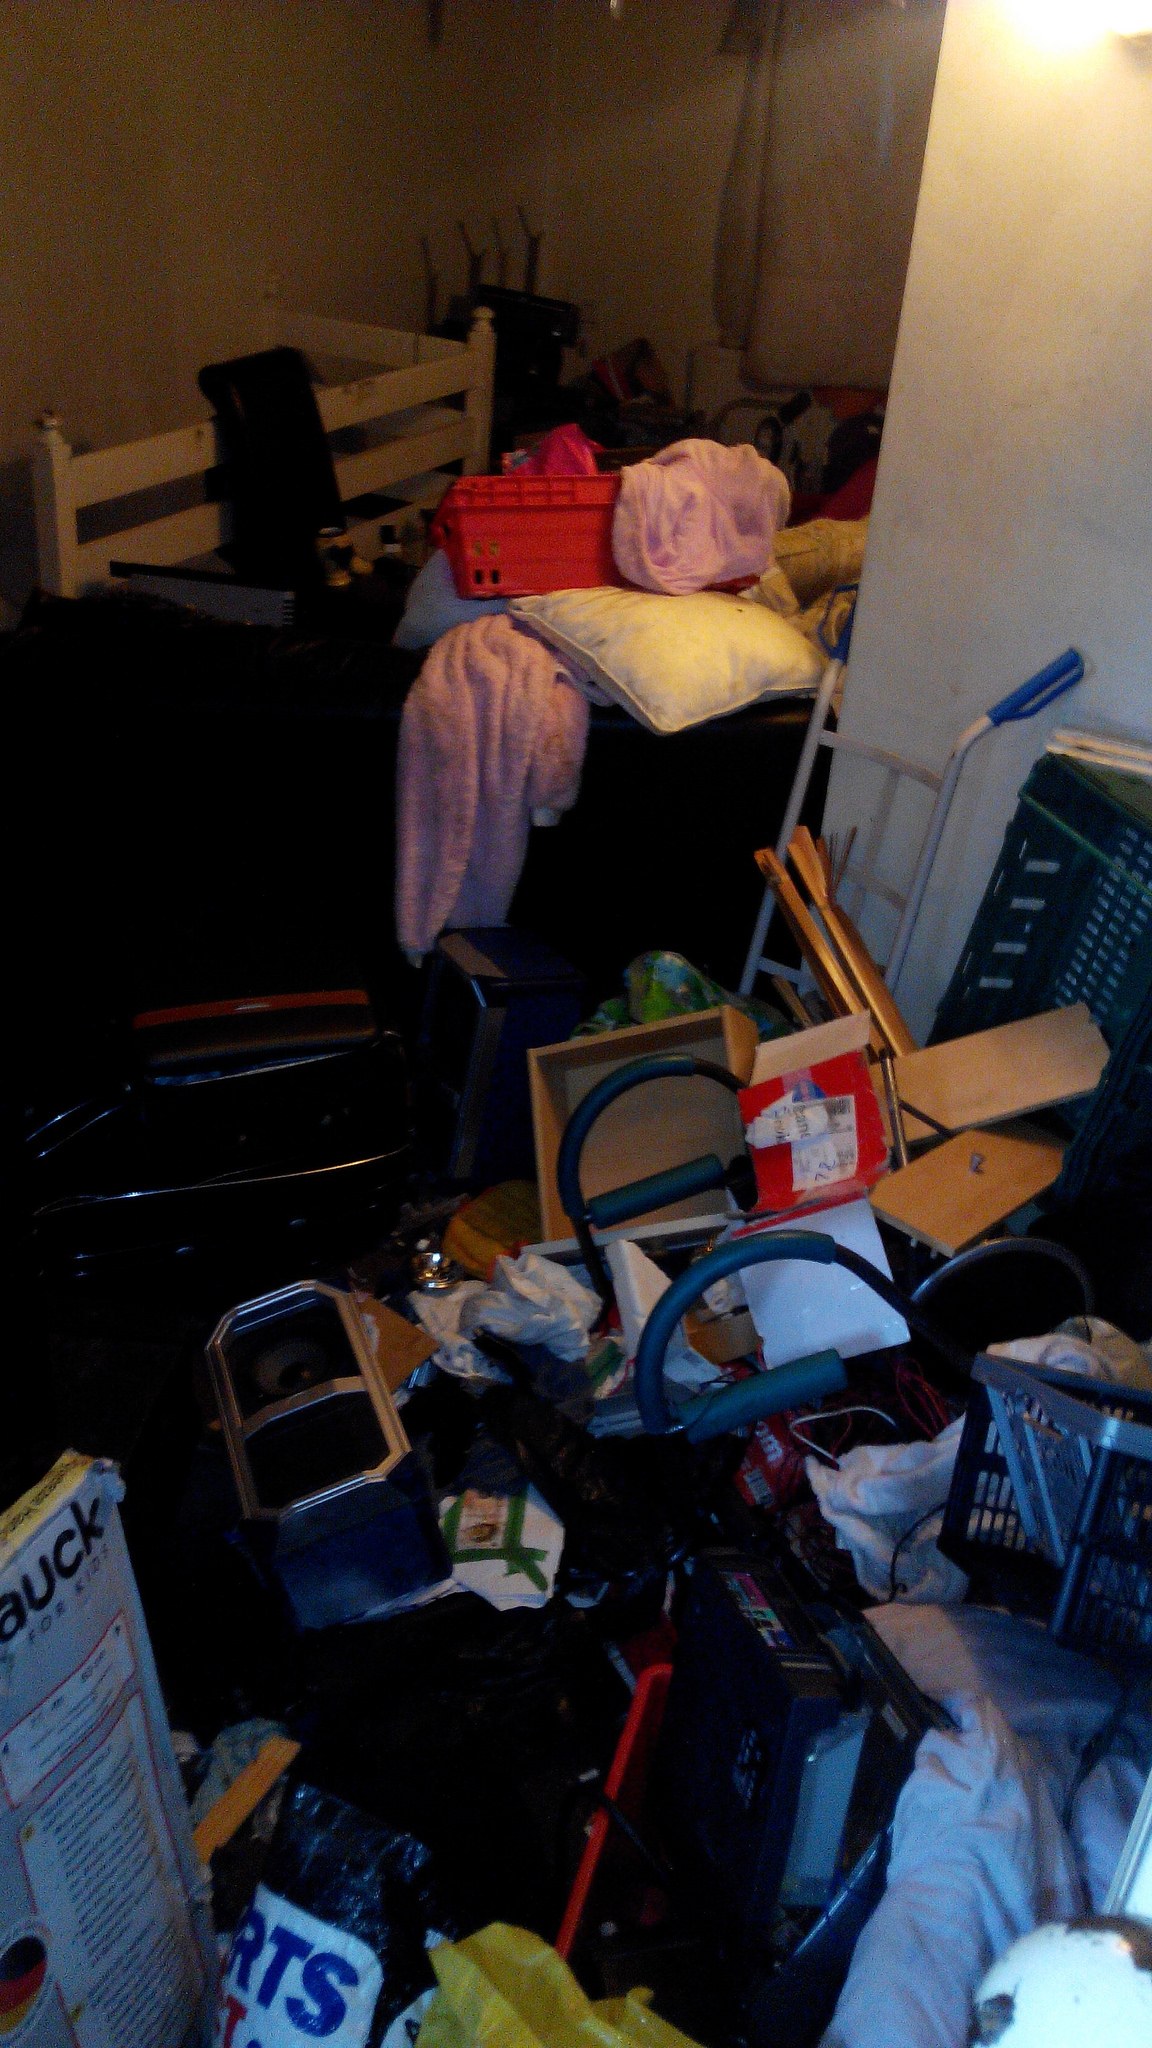 Don't be a hoarder